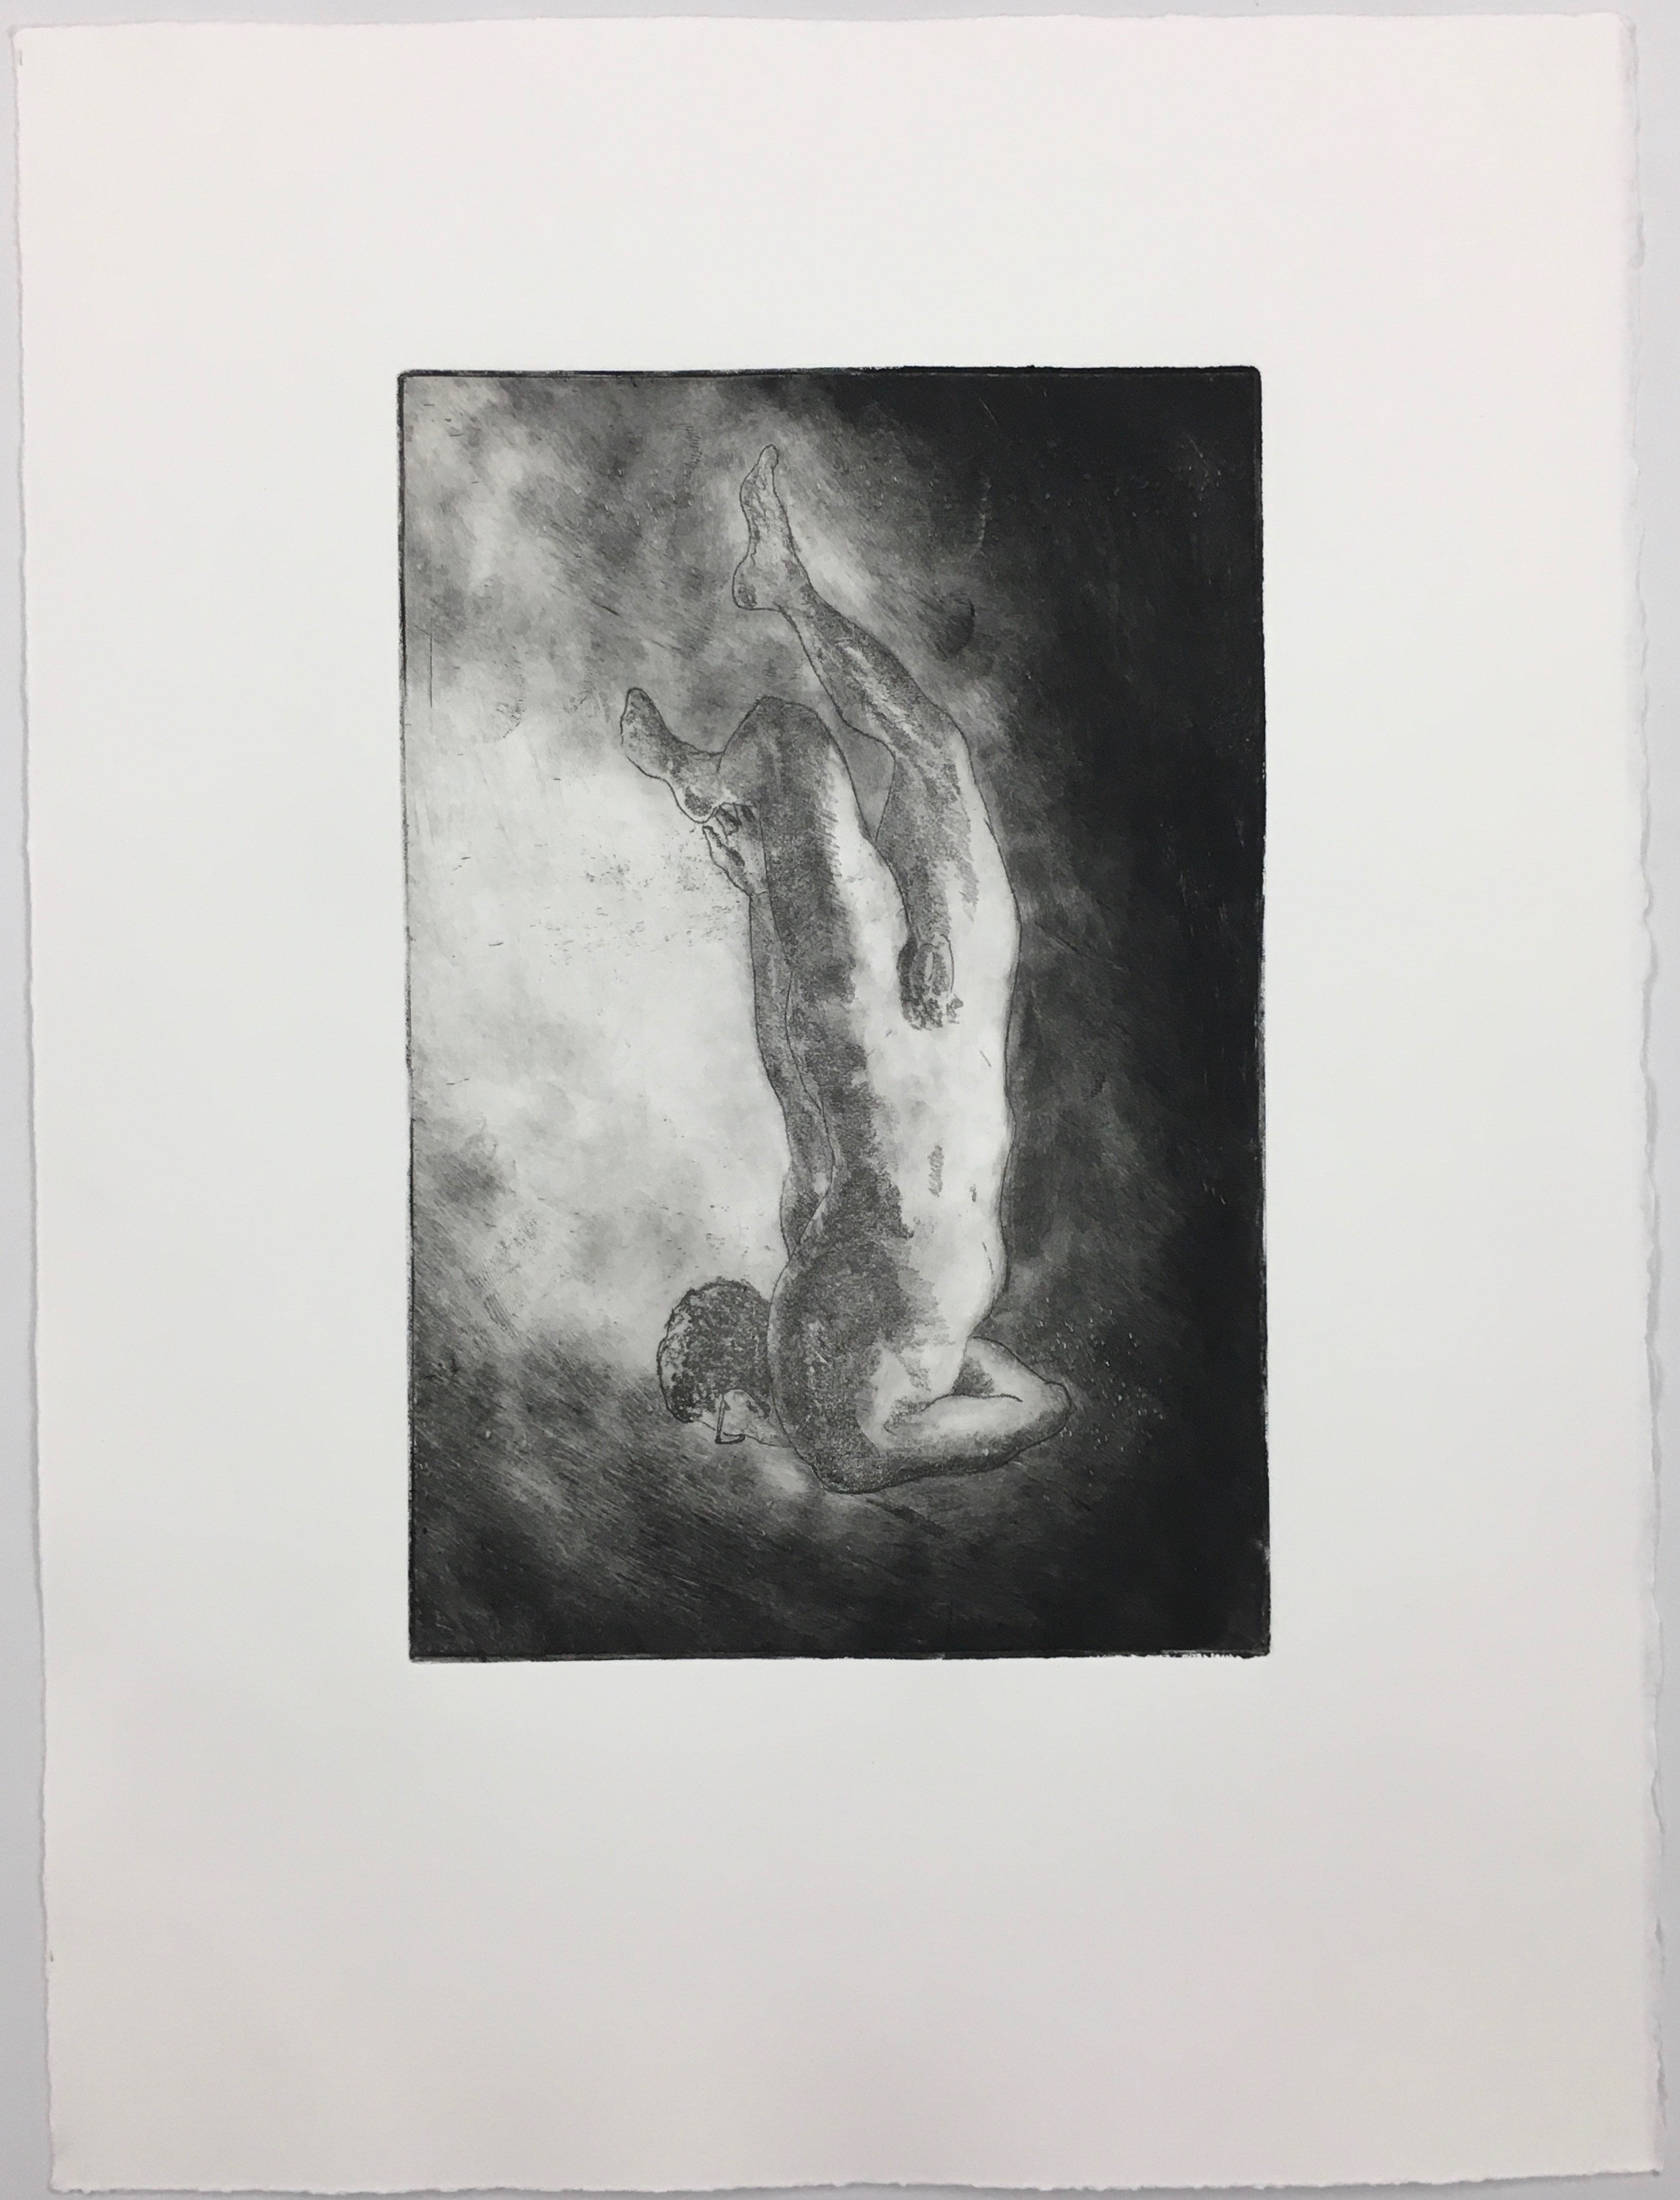 Failed Attempts in the Act of Falling Up: Attempt No. 7, #2, 2019.
                    Monoprint on top of etching on soft ground, 9” x 6” by Karl Daum